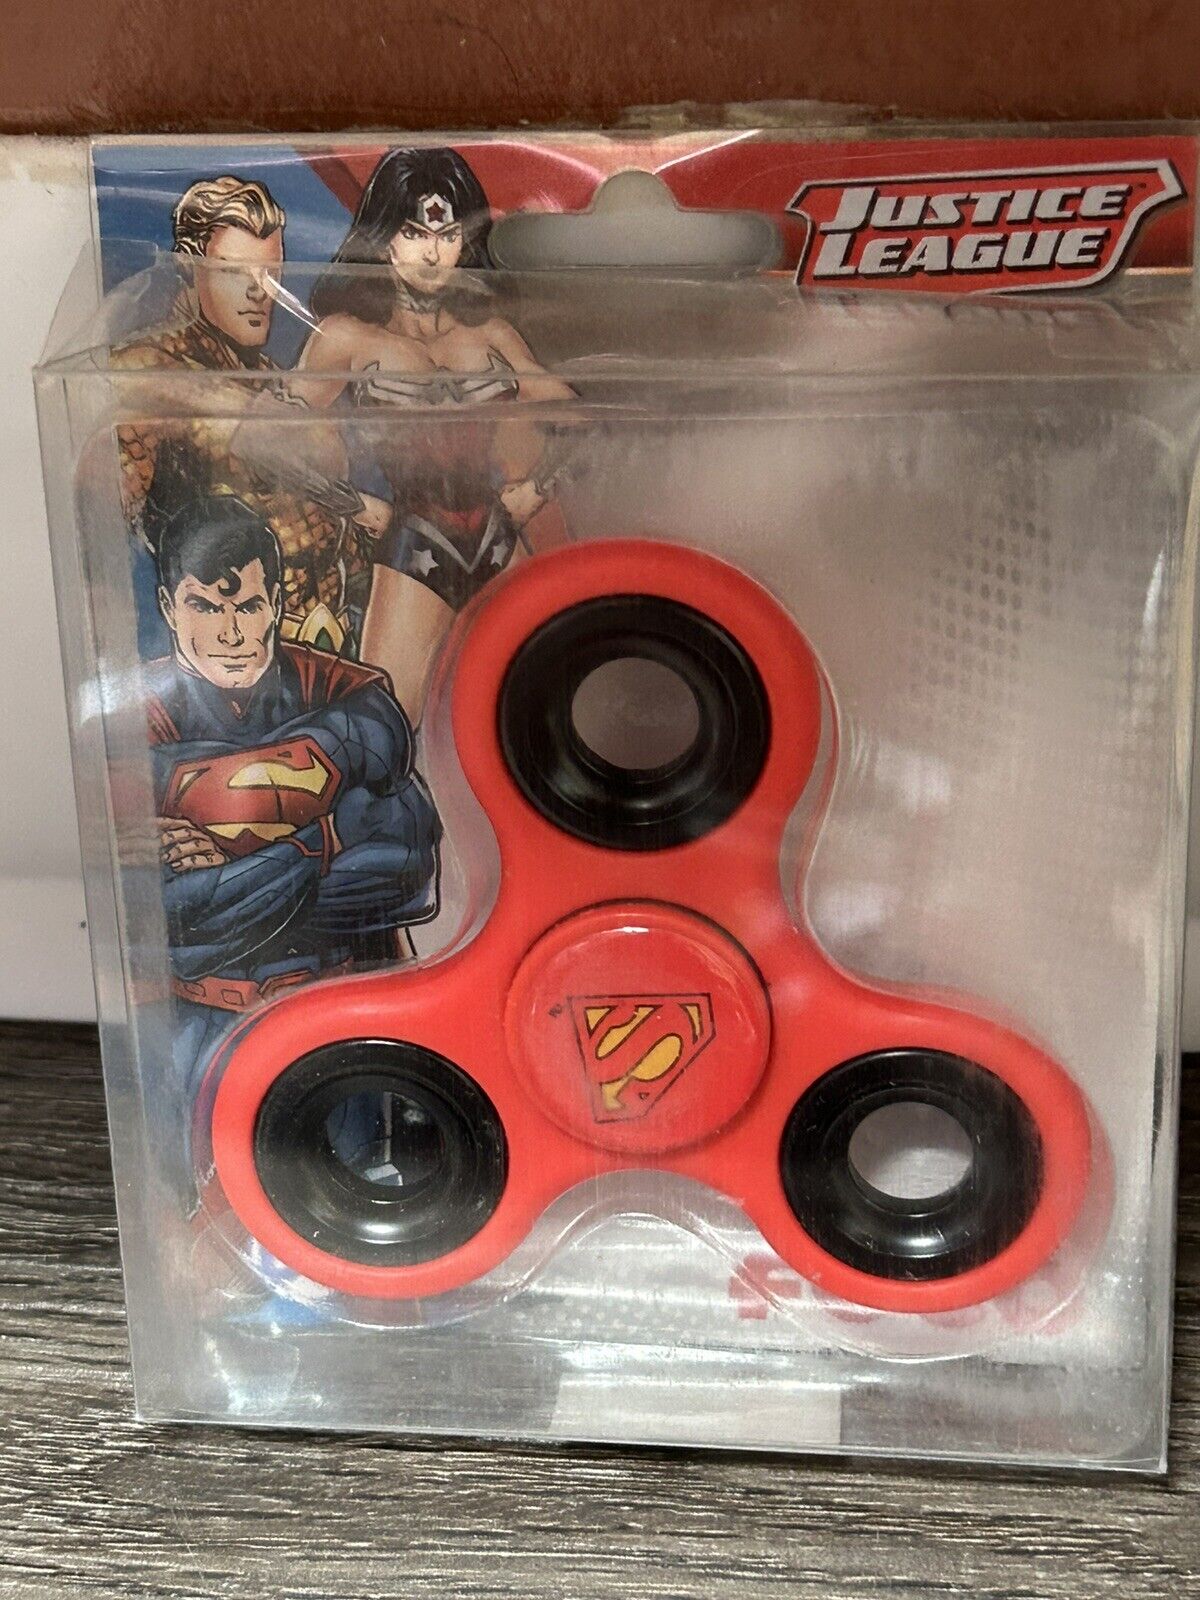 NEW OLD STOCK SUPERMAN JUSTICE LEAGUE Fidget Spinner BY FOCO DC Comics